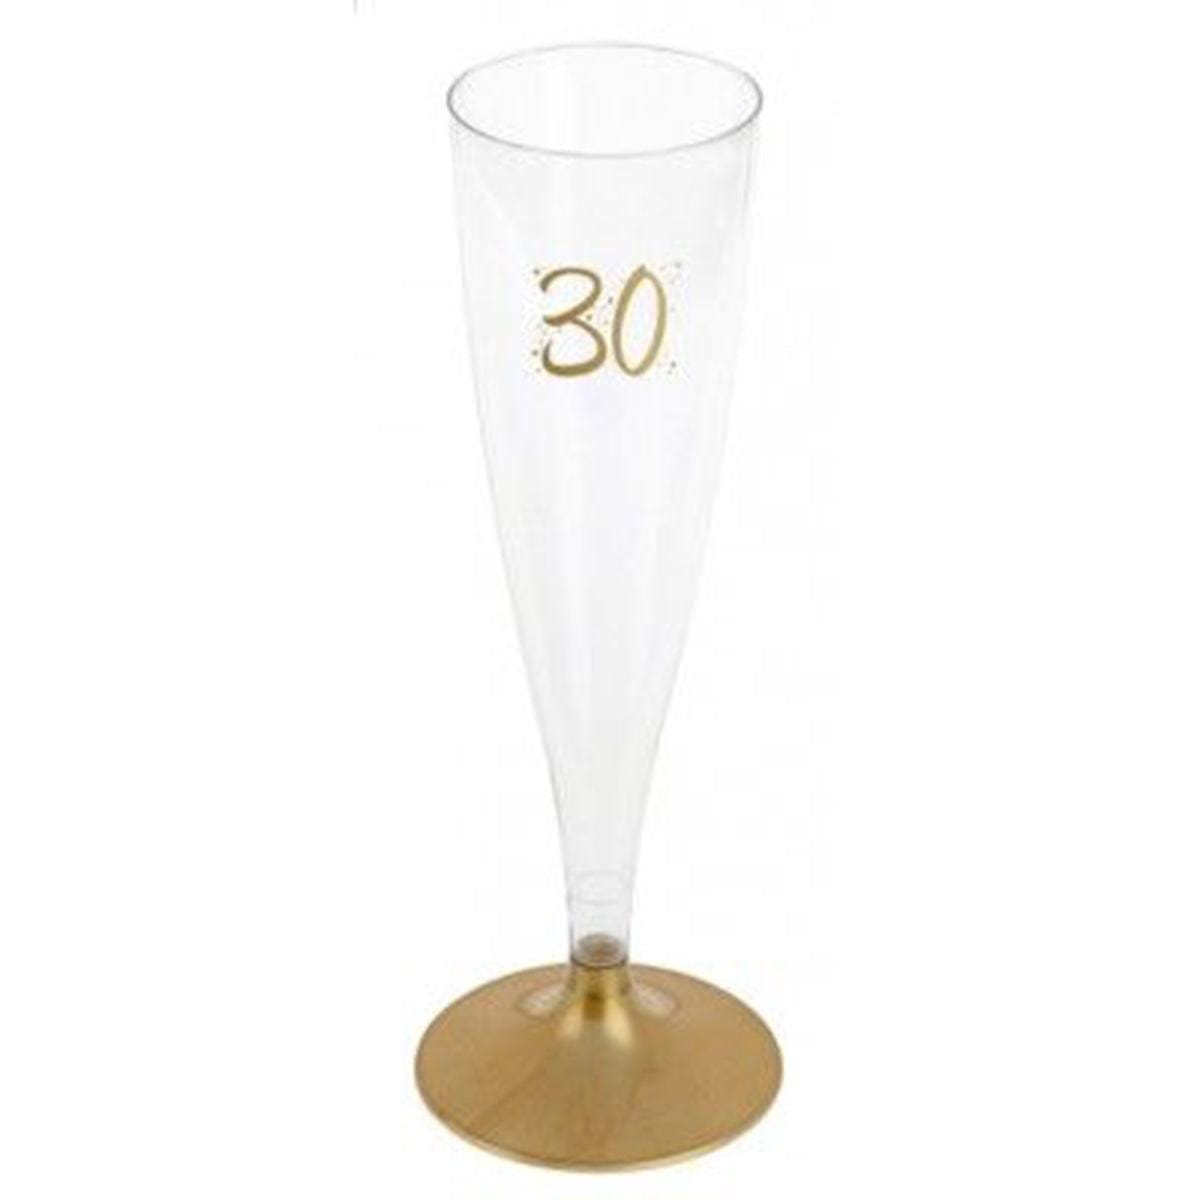 SANTEX Age Specific Birthday 30th Birthday Champagne Flute, Gold, 6 Count